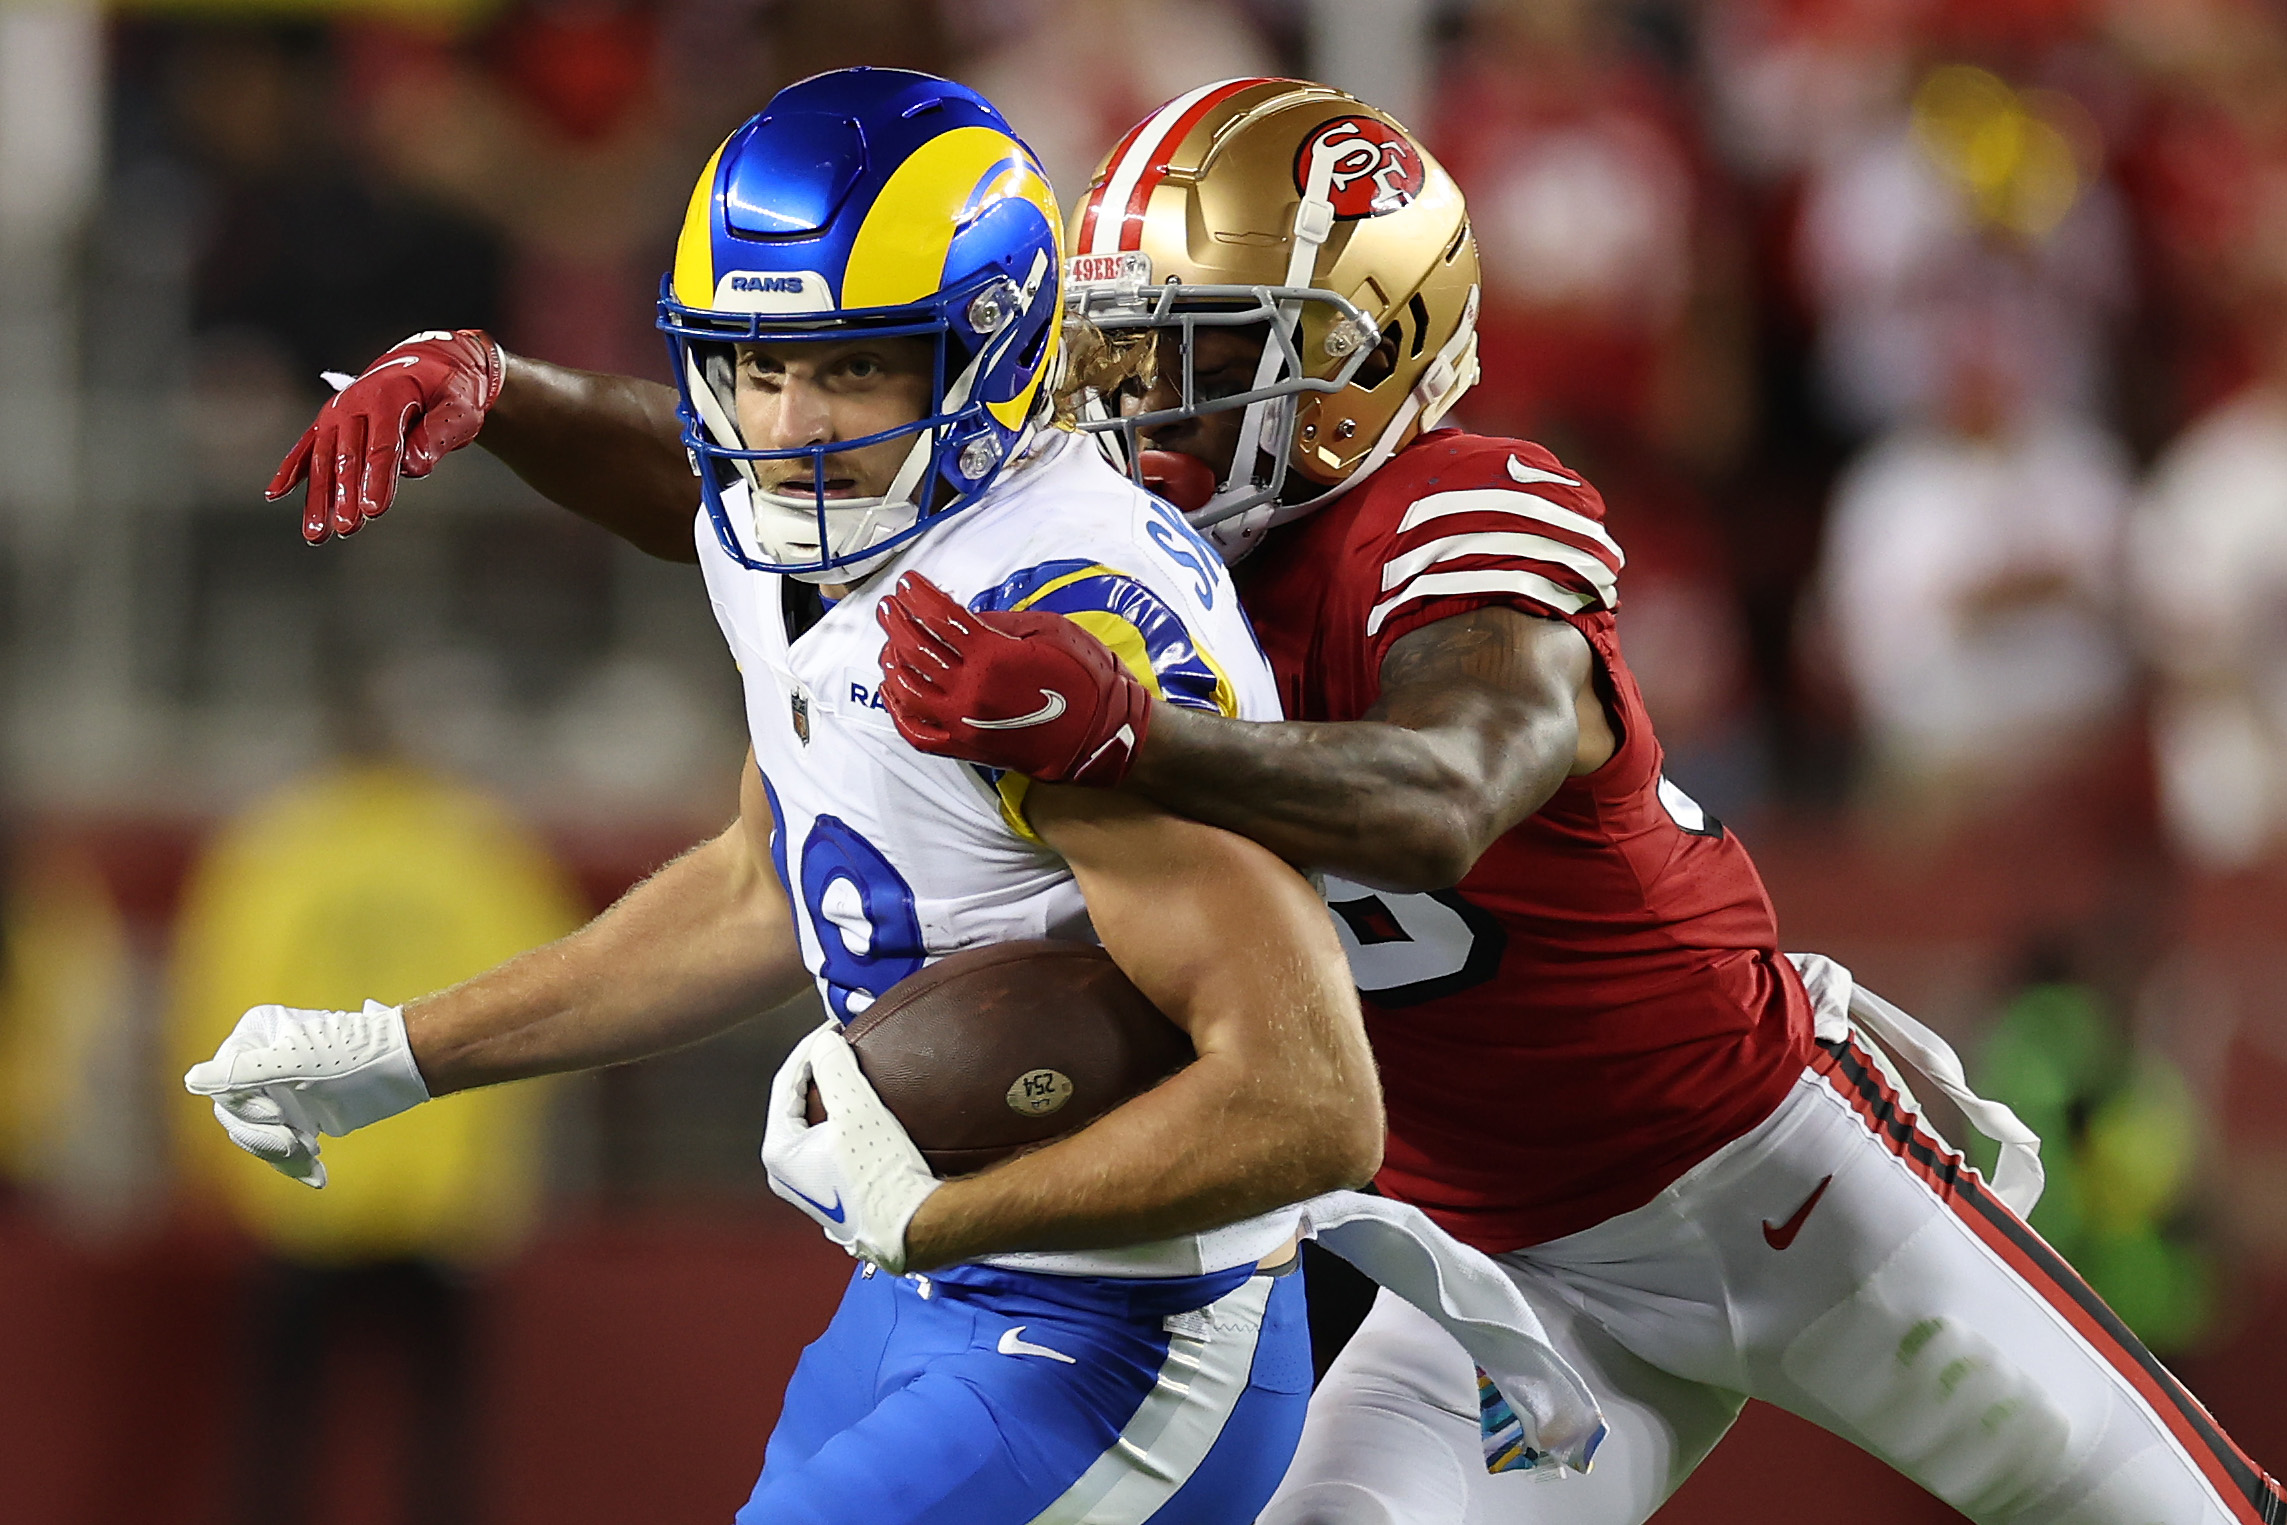 rams vs 49ers where to watch